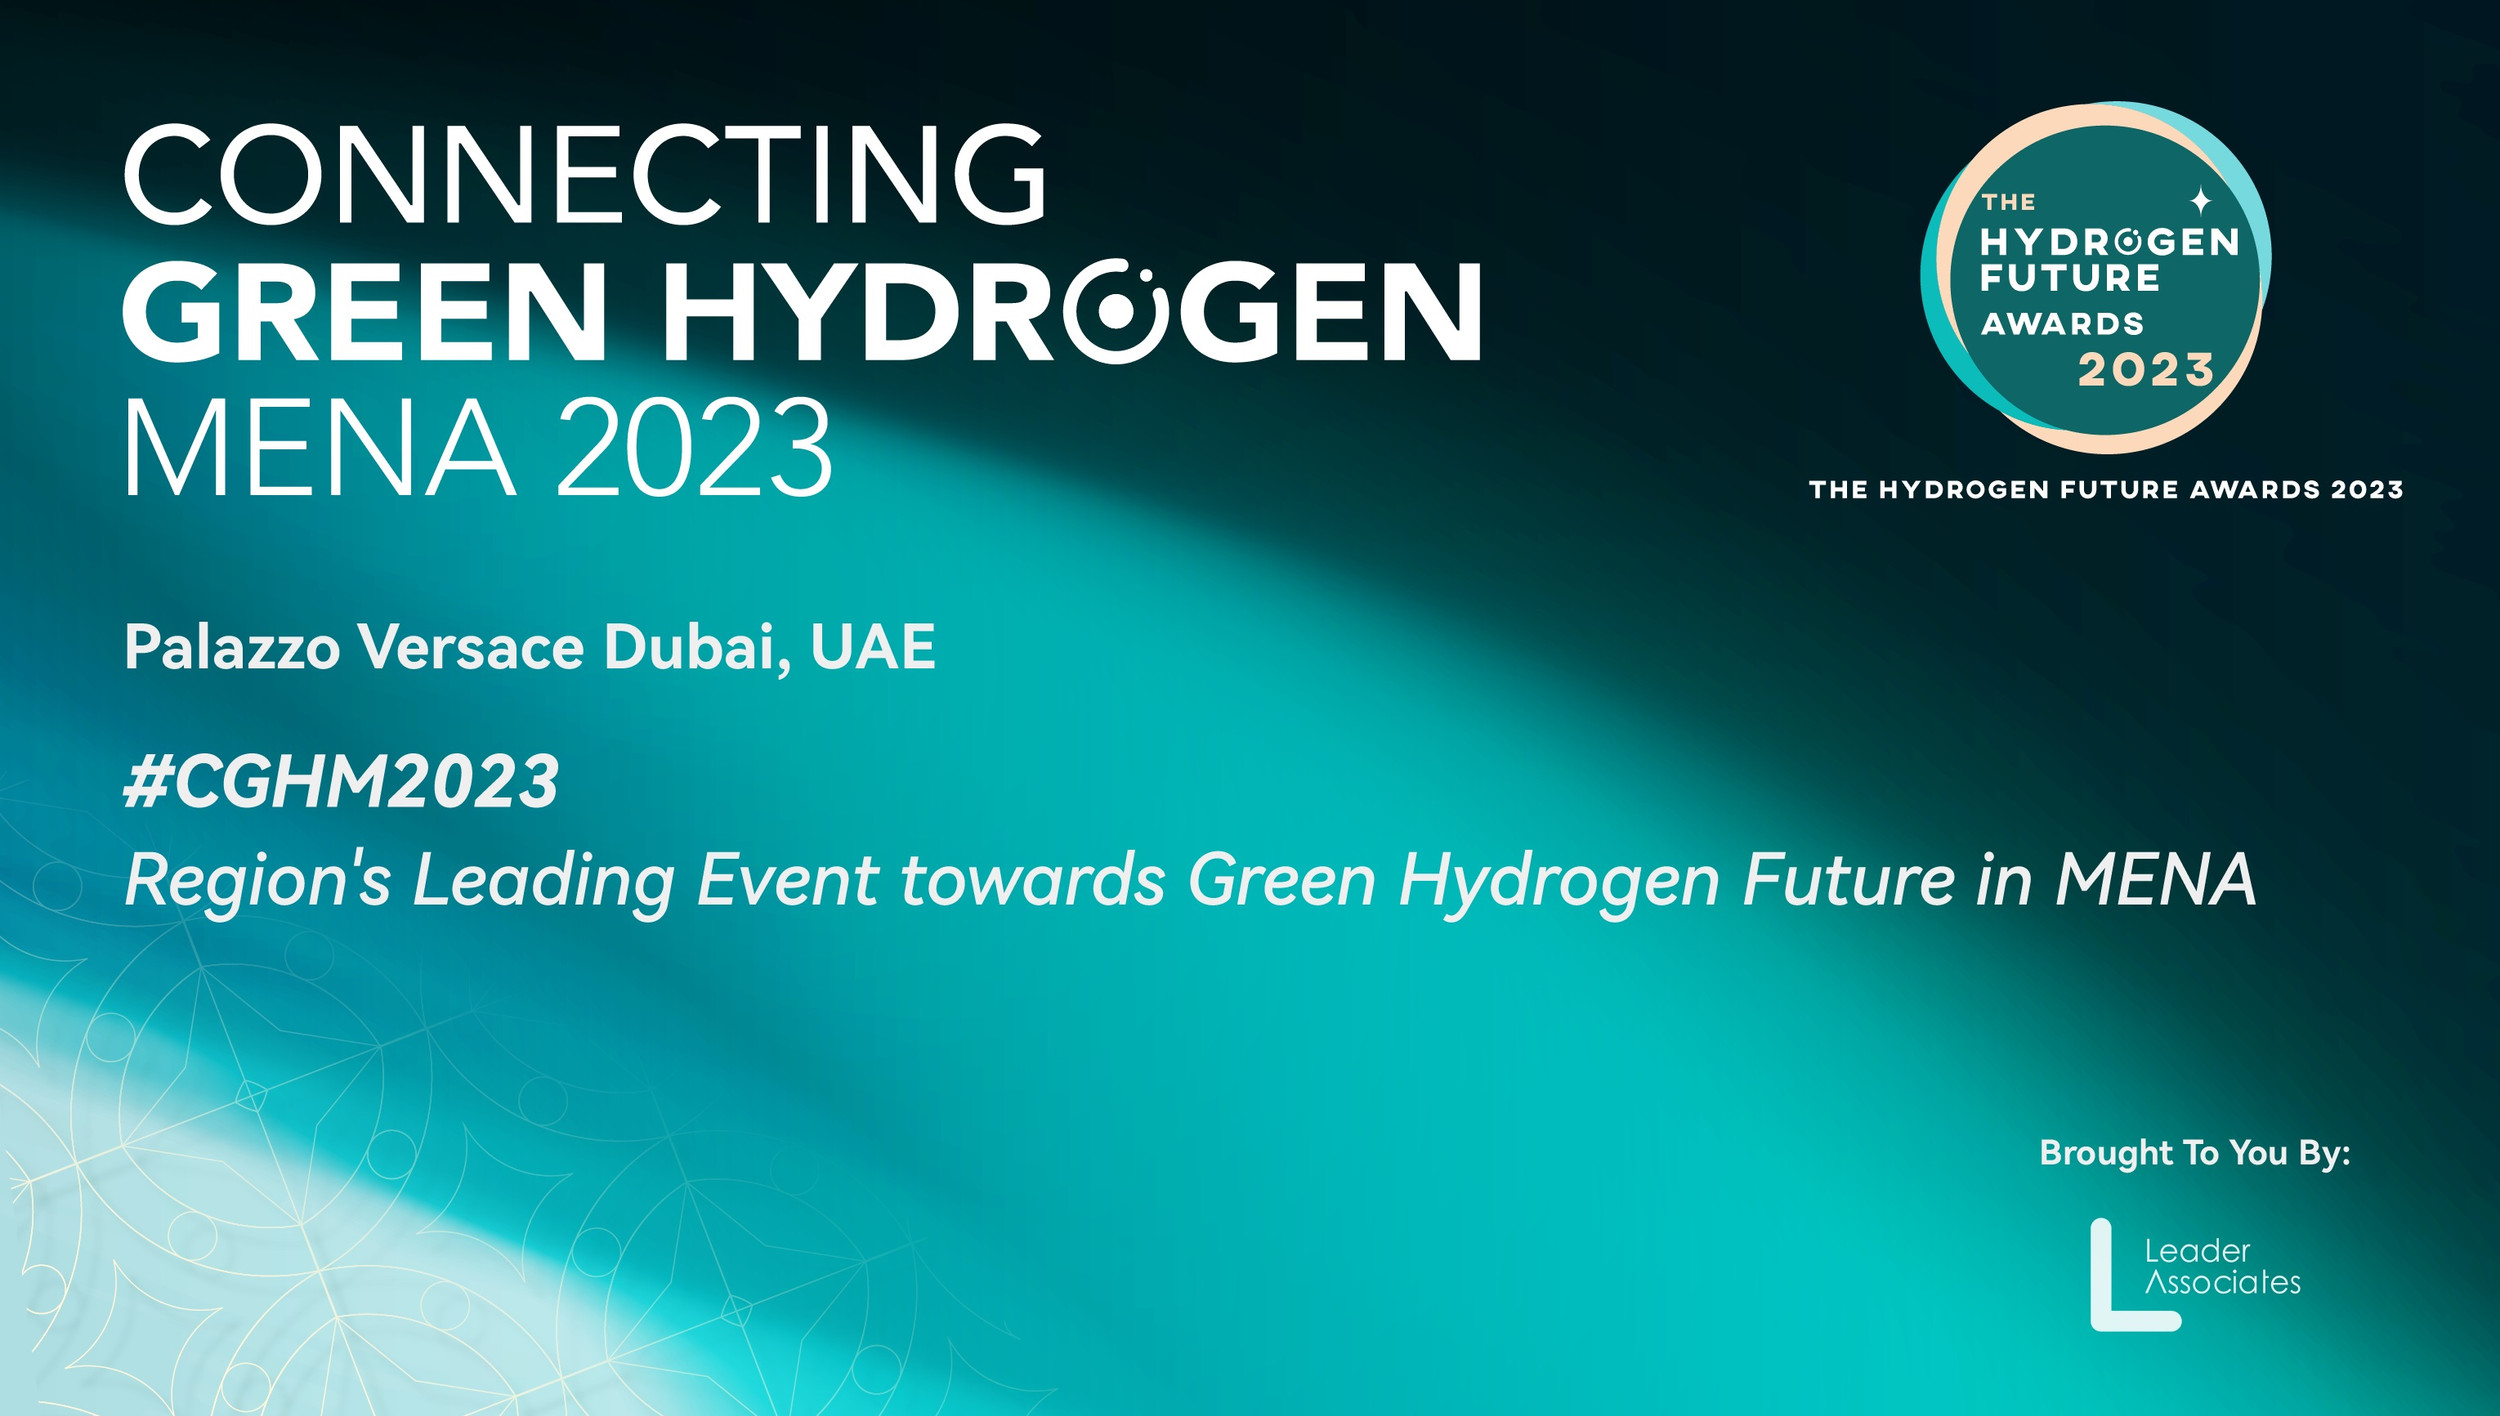 Build Hydrogen Connections at Connecting Green Hydrogen MENA 2023